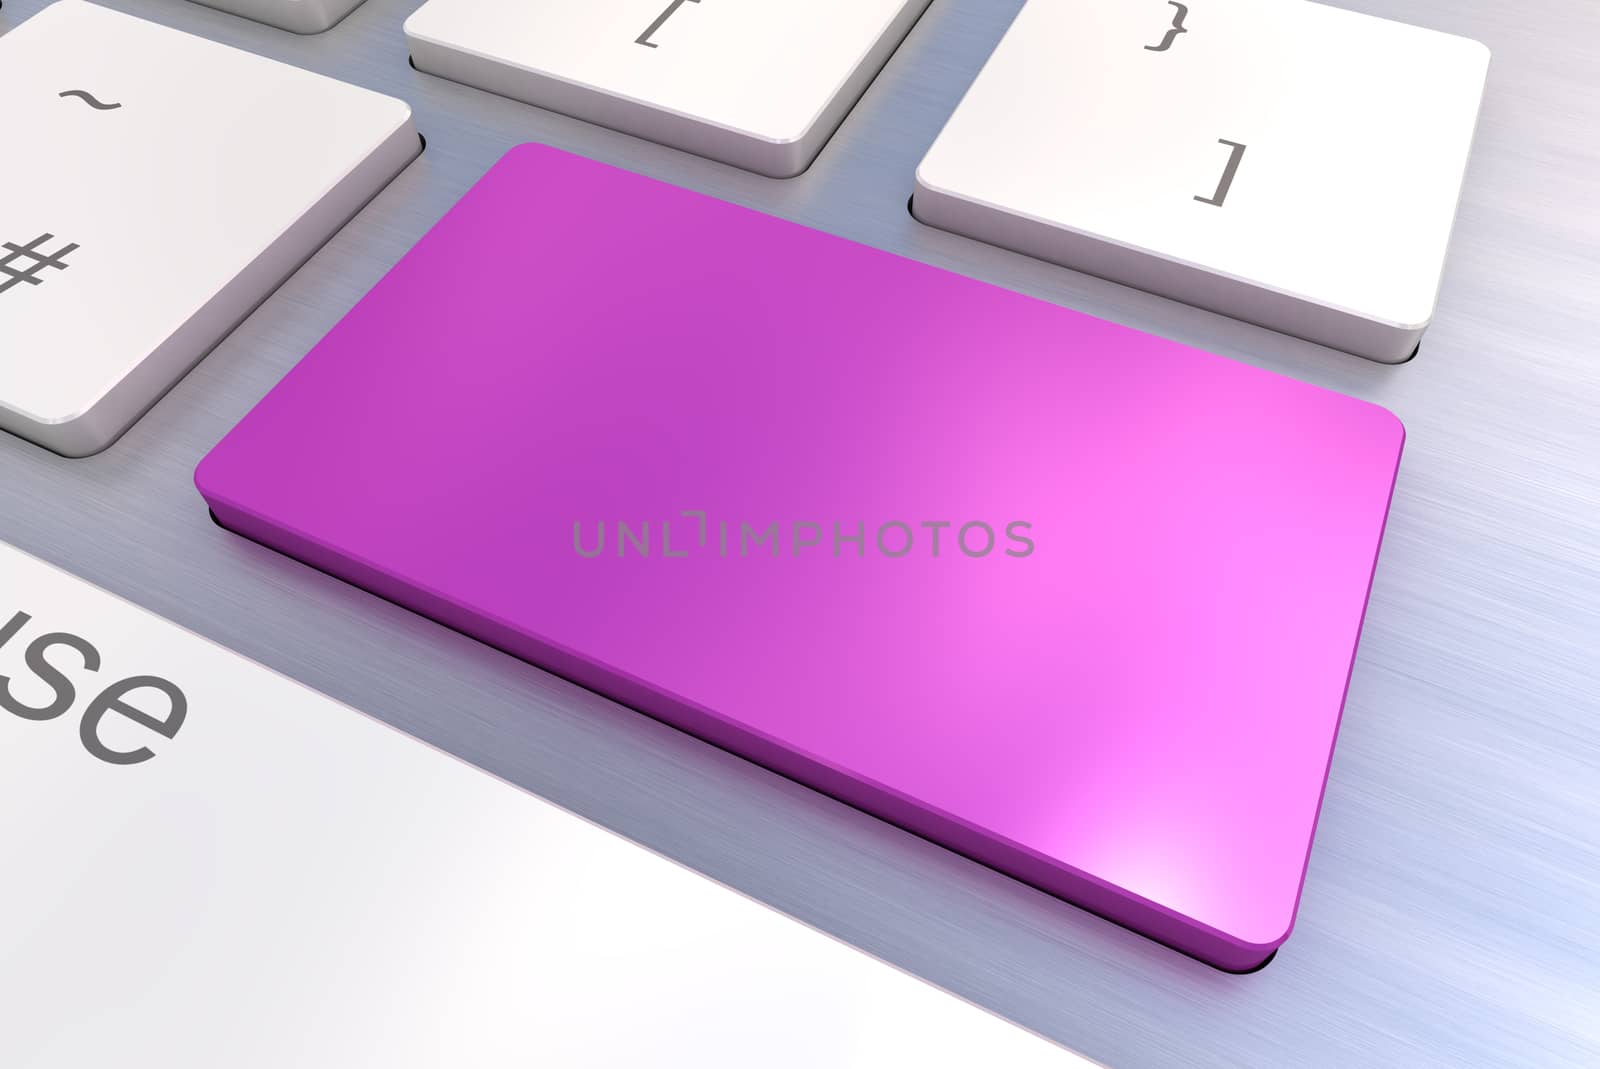 A Colourful 3d Rendered Illustration showing a Blank Purple Keyboard concept on a Computer Keyboard